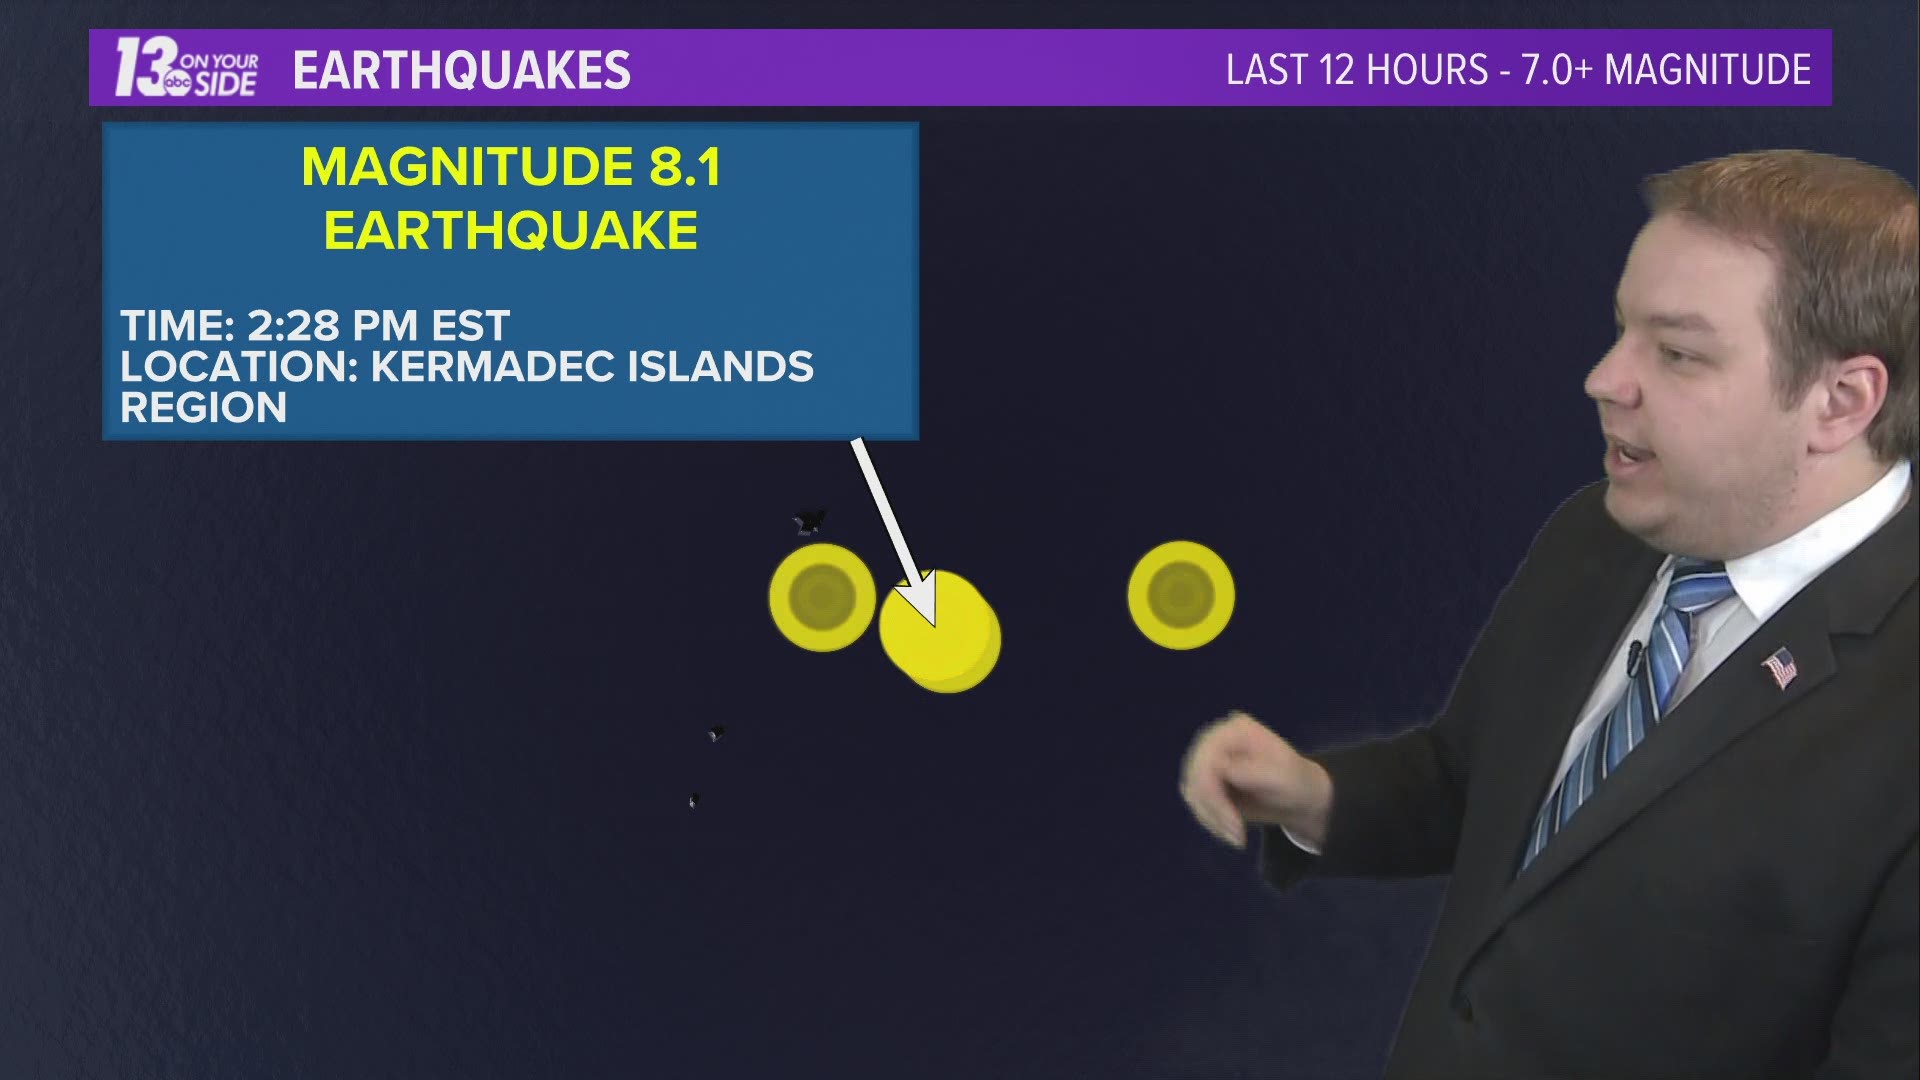 A Tsunami Watch was issued earlier today for Hawaii after an 8.1 Magnitude quake northeast of New Zealand. That watch was later cancelled.